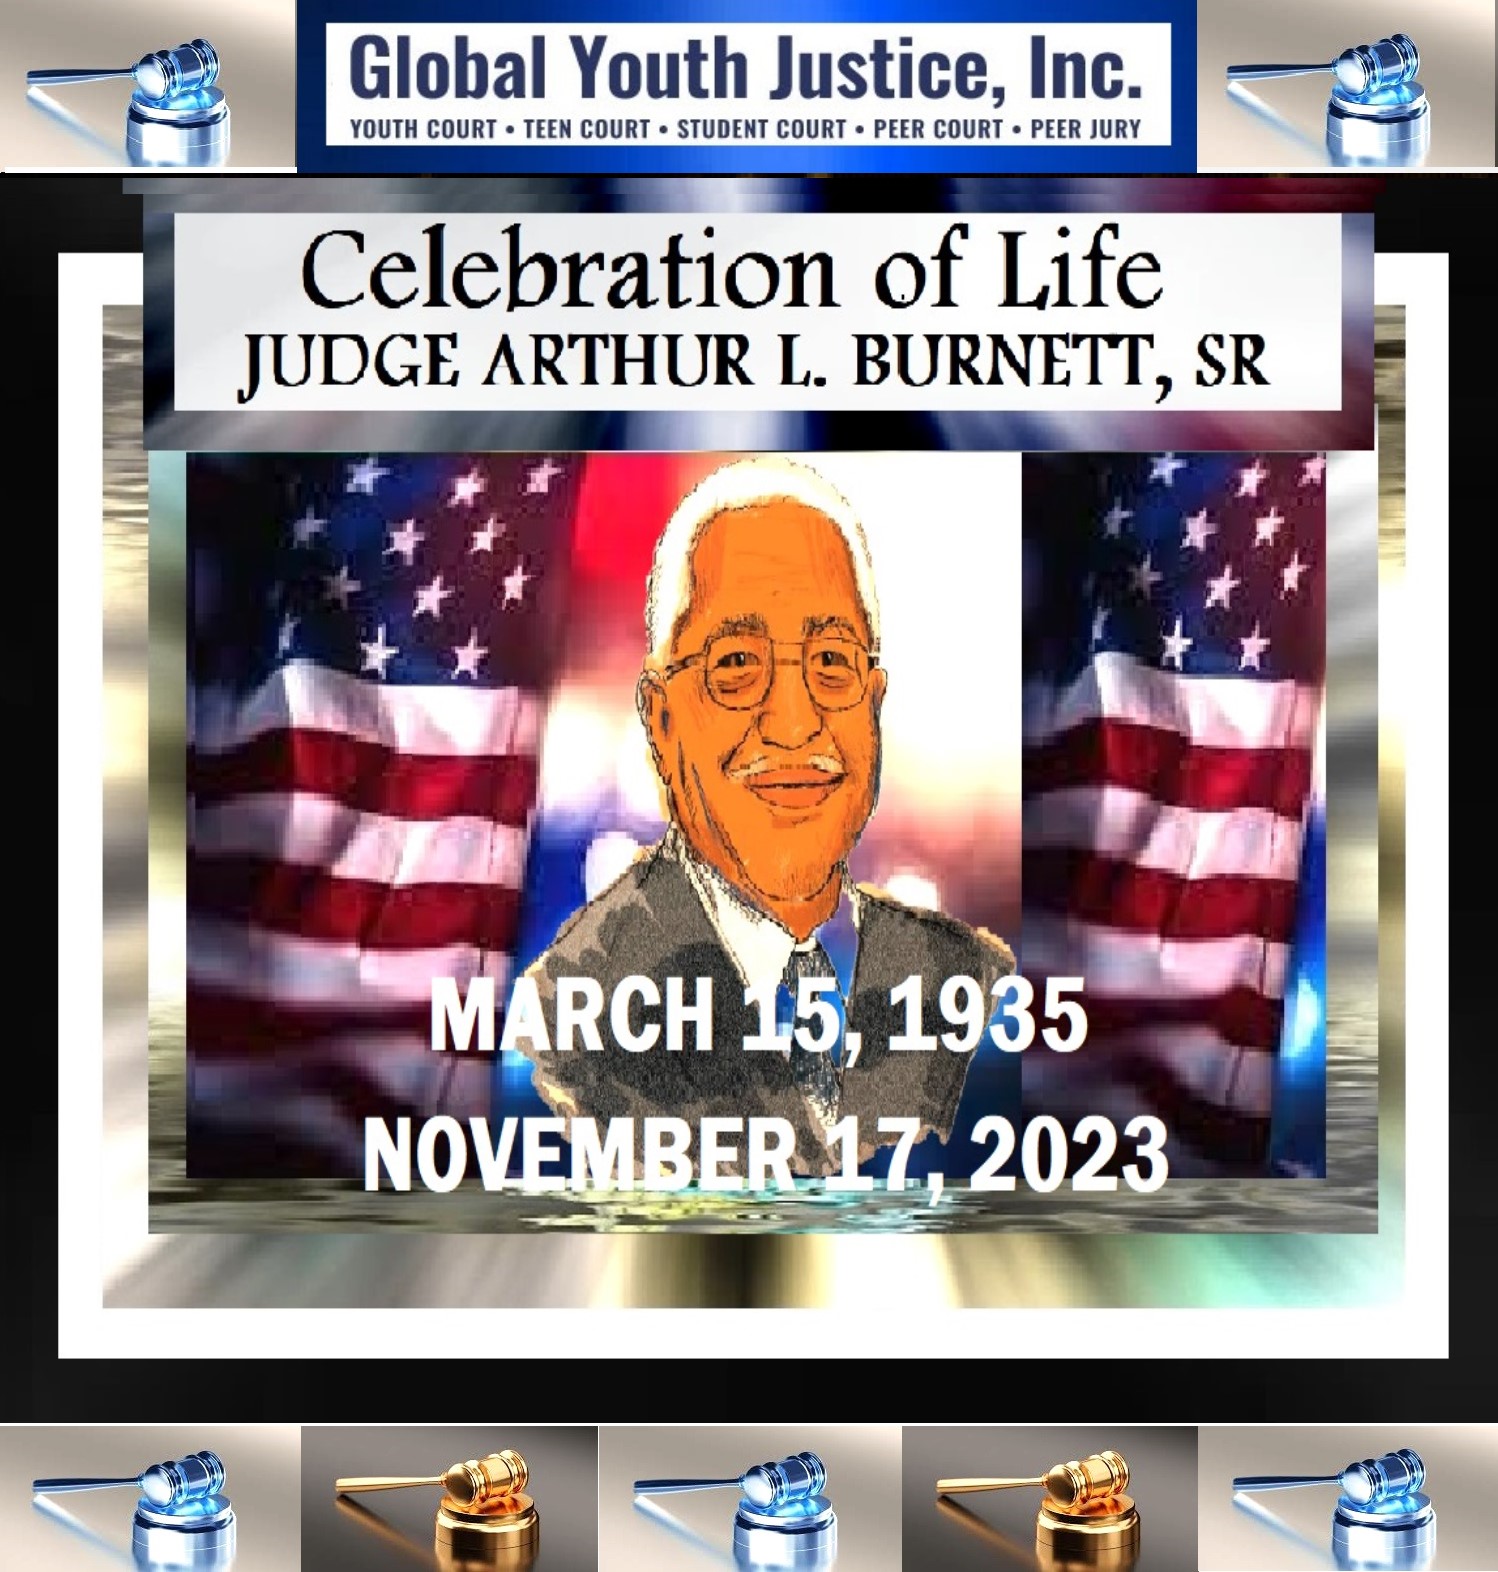 Judge Arthur L. Burnett, Sr. Co-Founder and Board VIce President of Global Youth Justice, Inc.